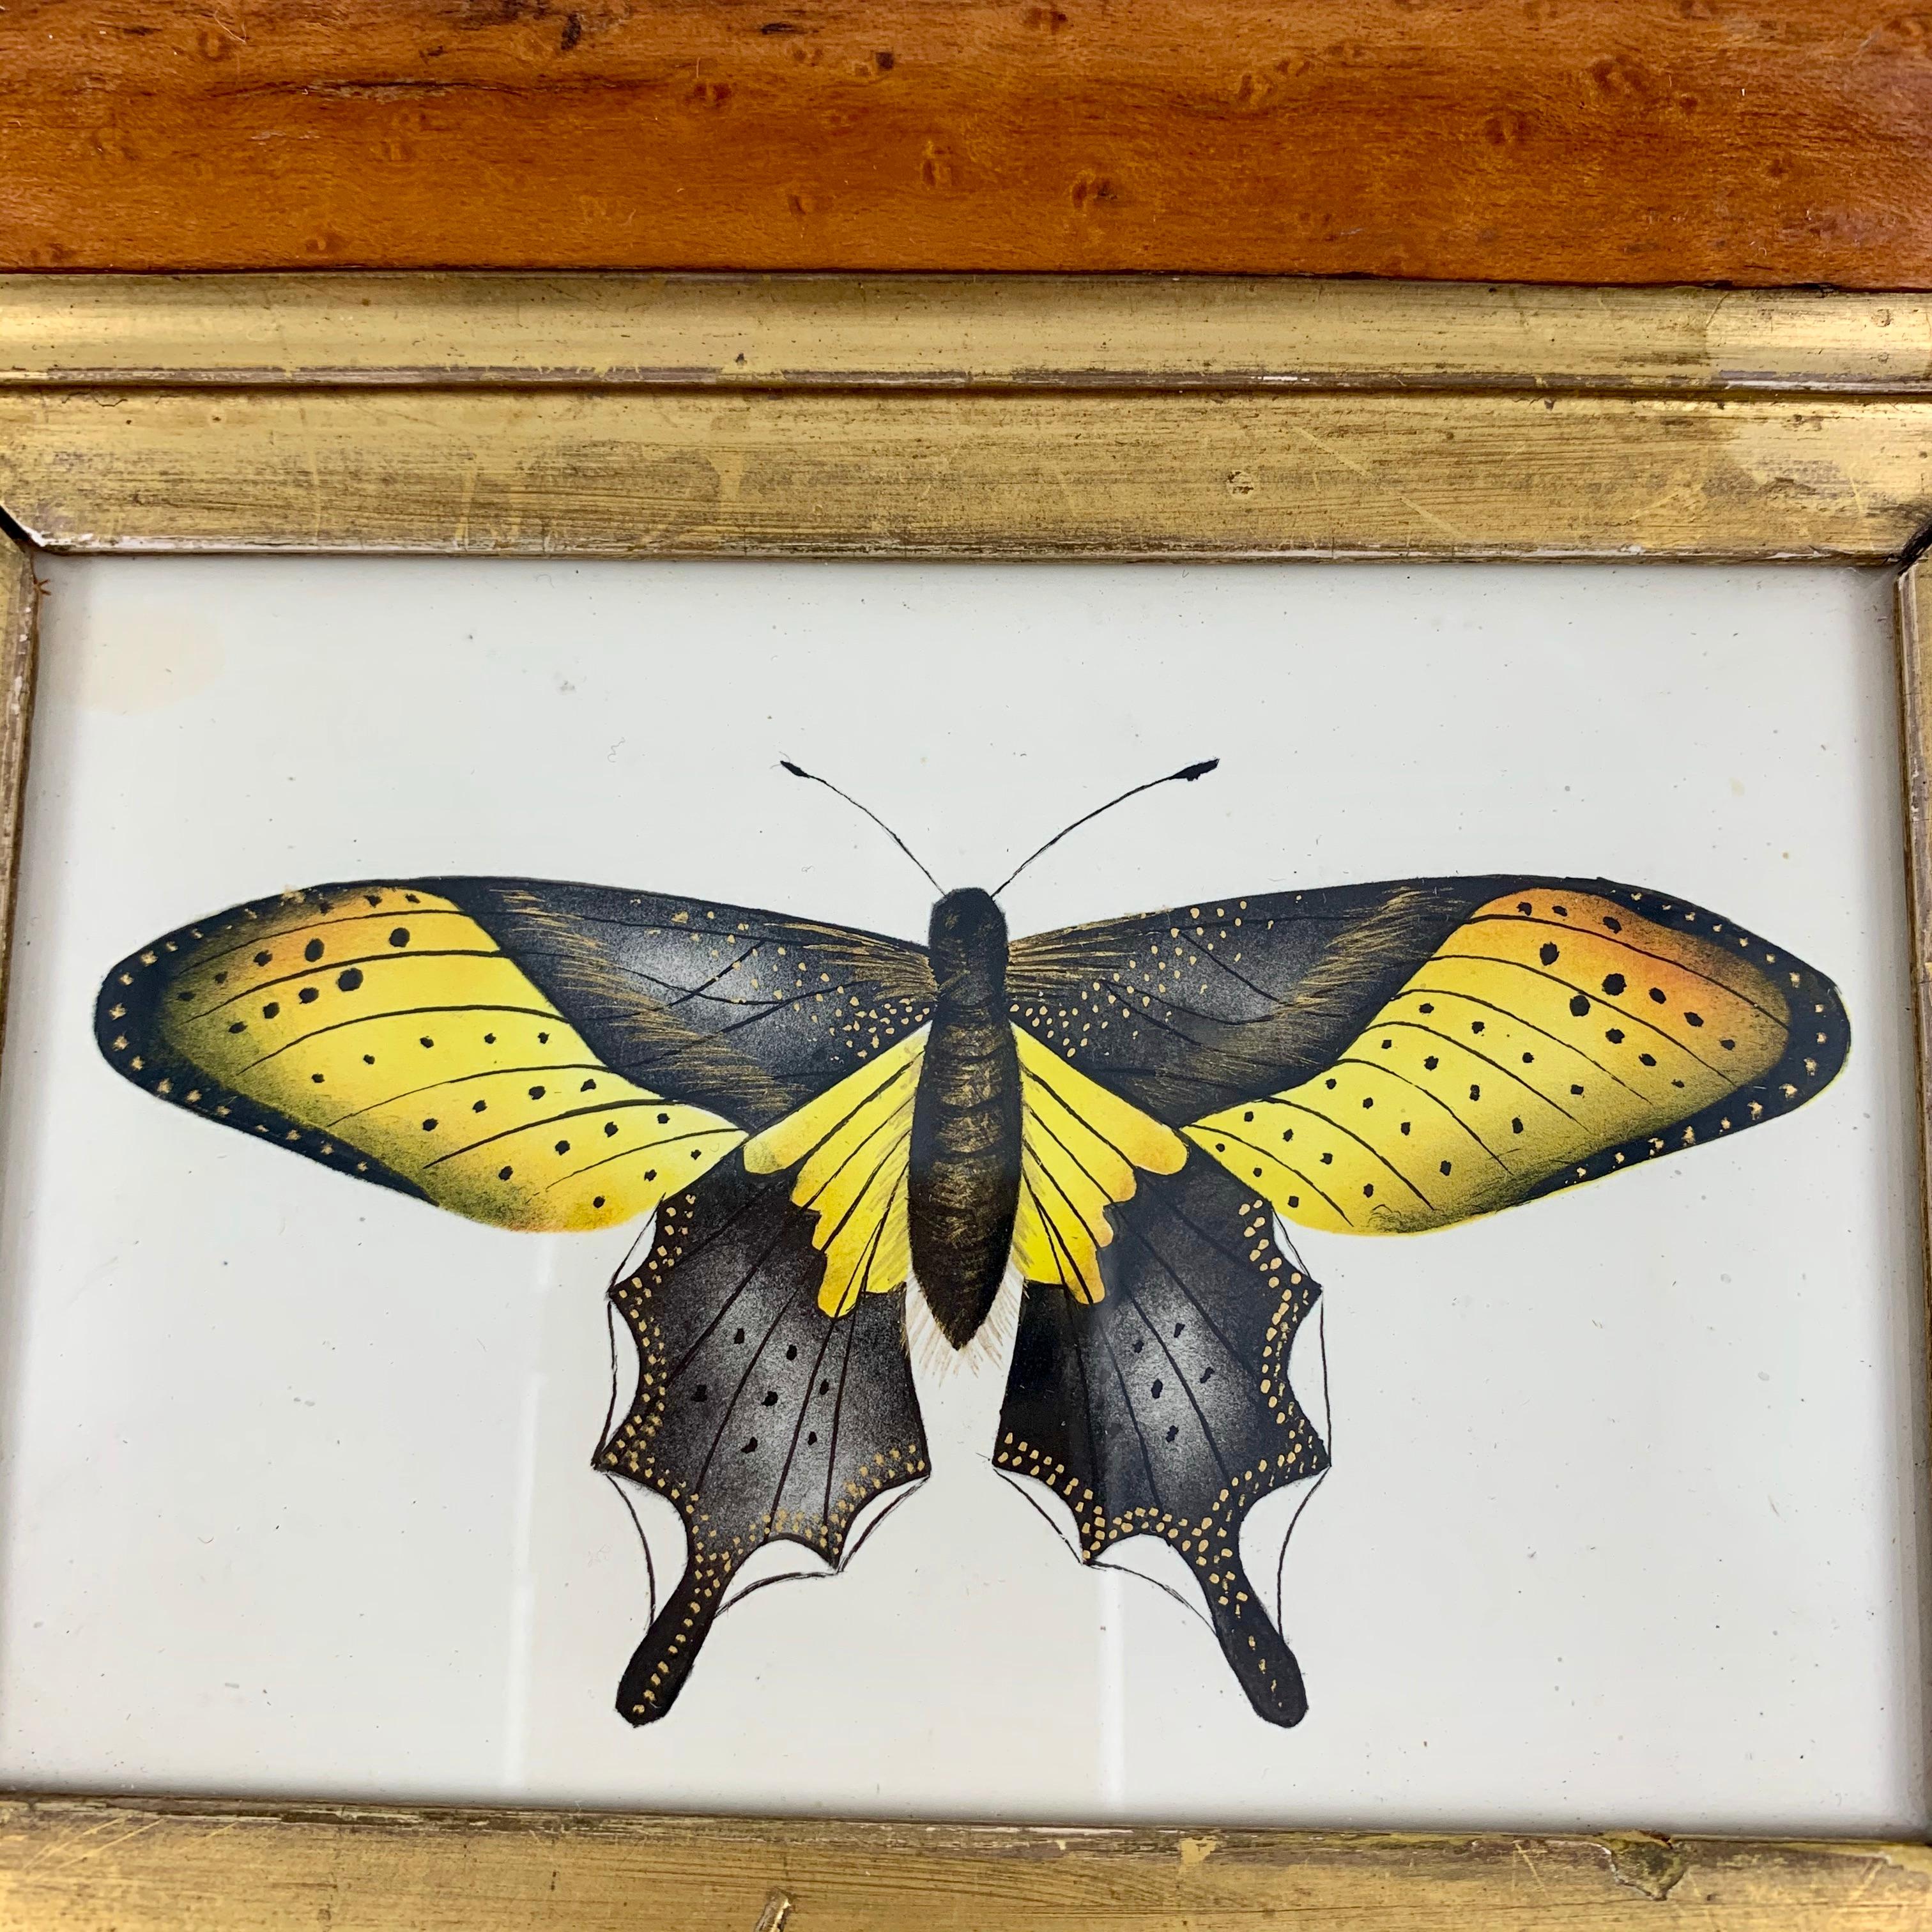 Beveled English Regency Period Original Watercolor in Fruitwood Frame, Yellow Butterfly